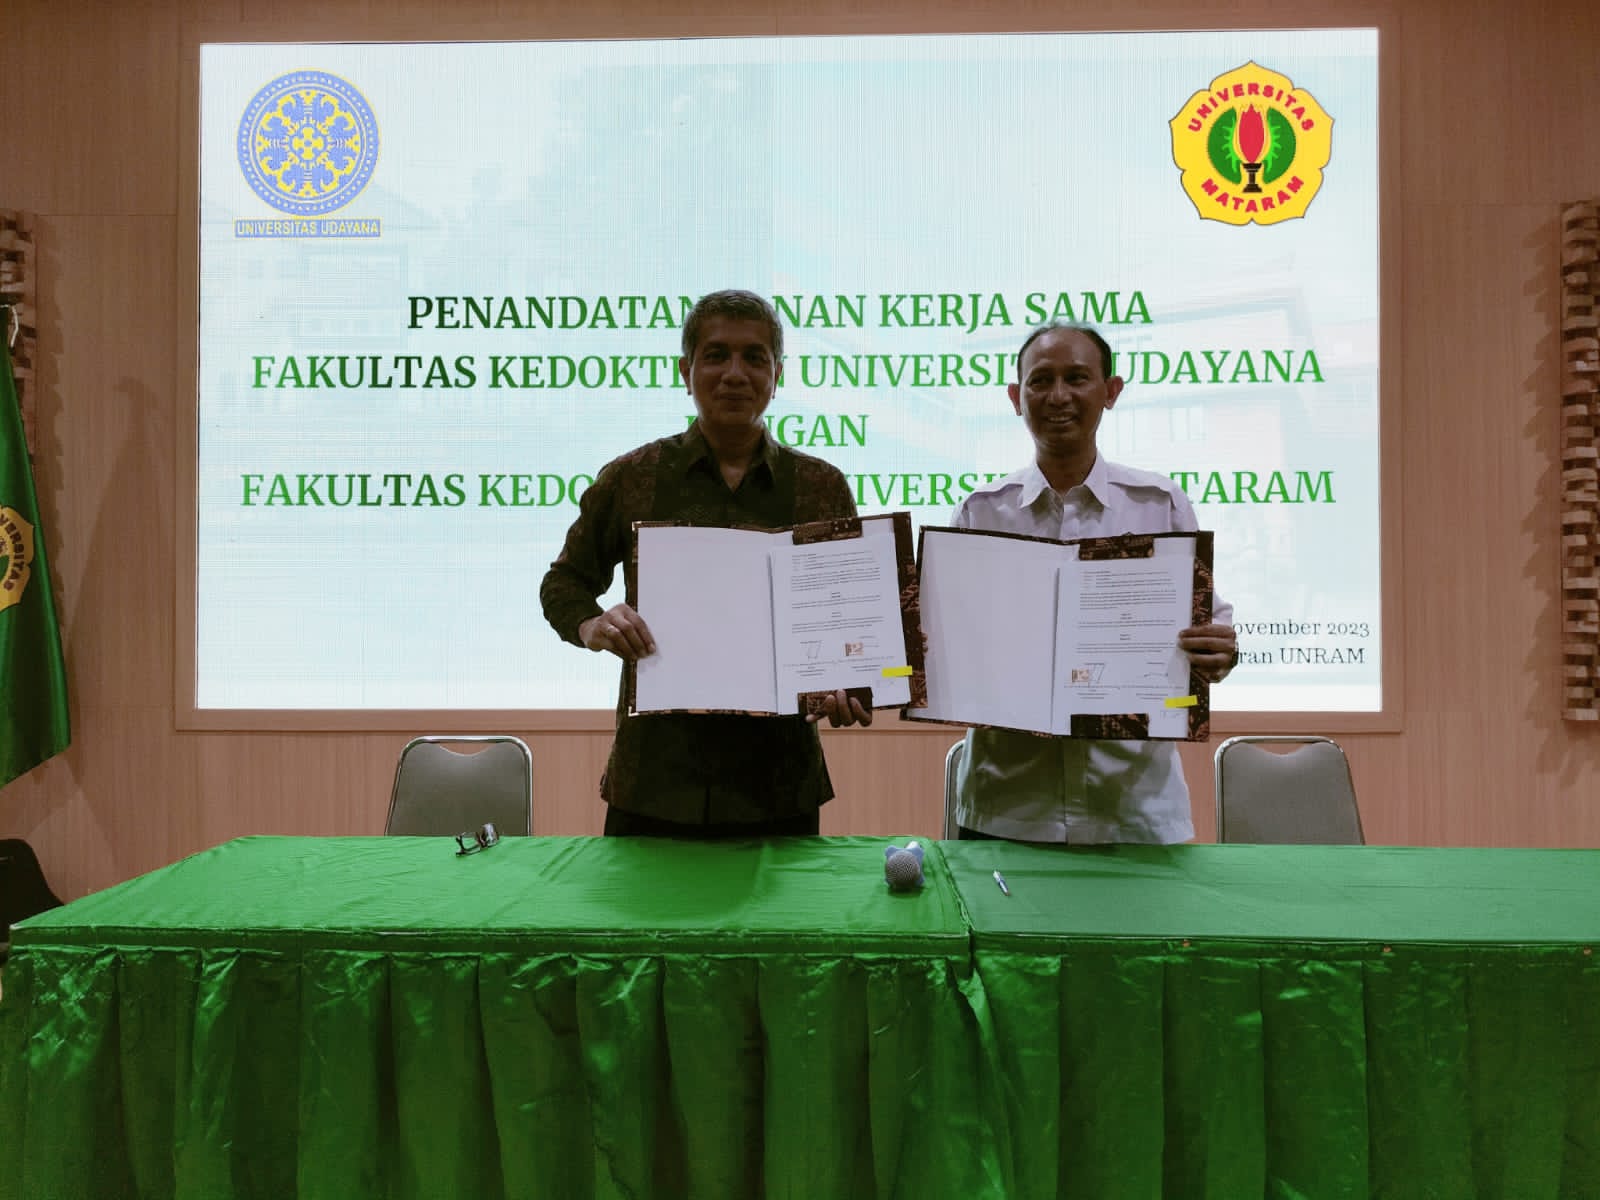 Signing of Cooperation Agreement in the Field of Research and Community Service between FK Unud and FK Unram